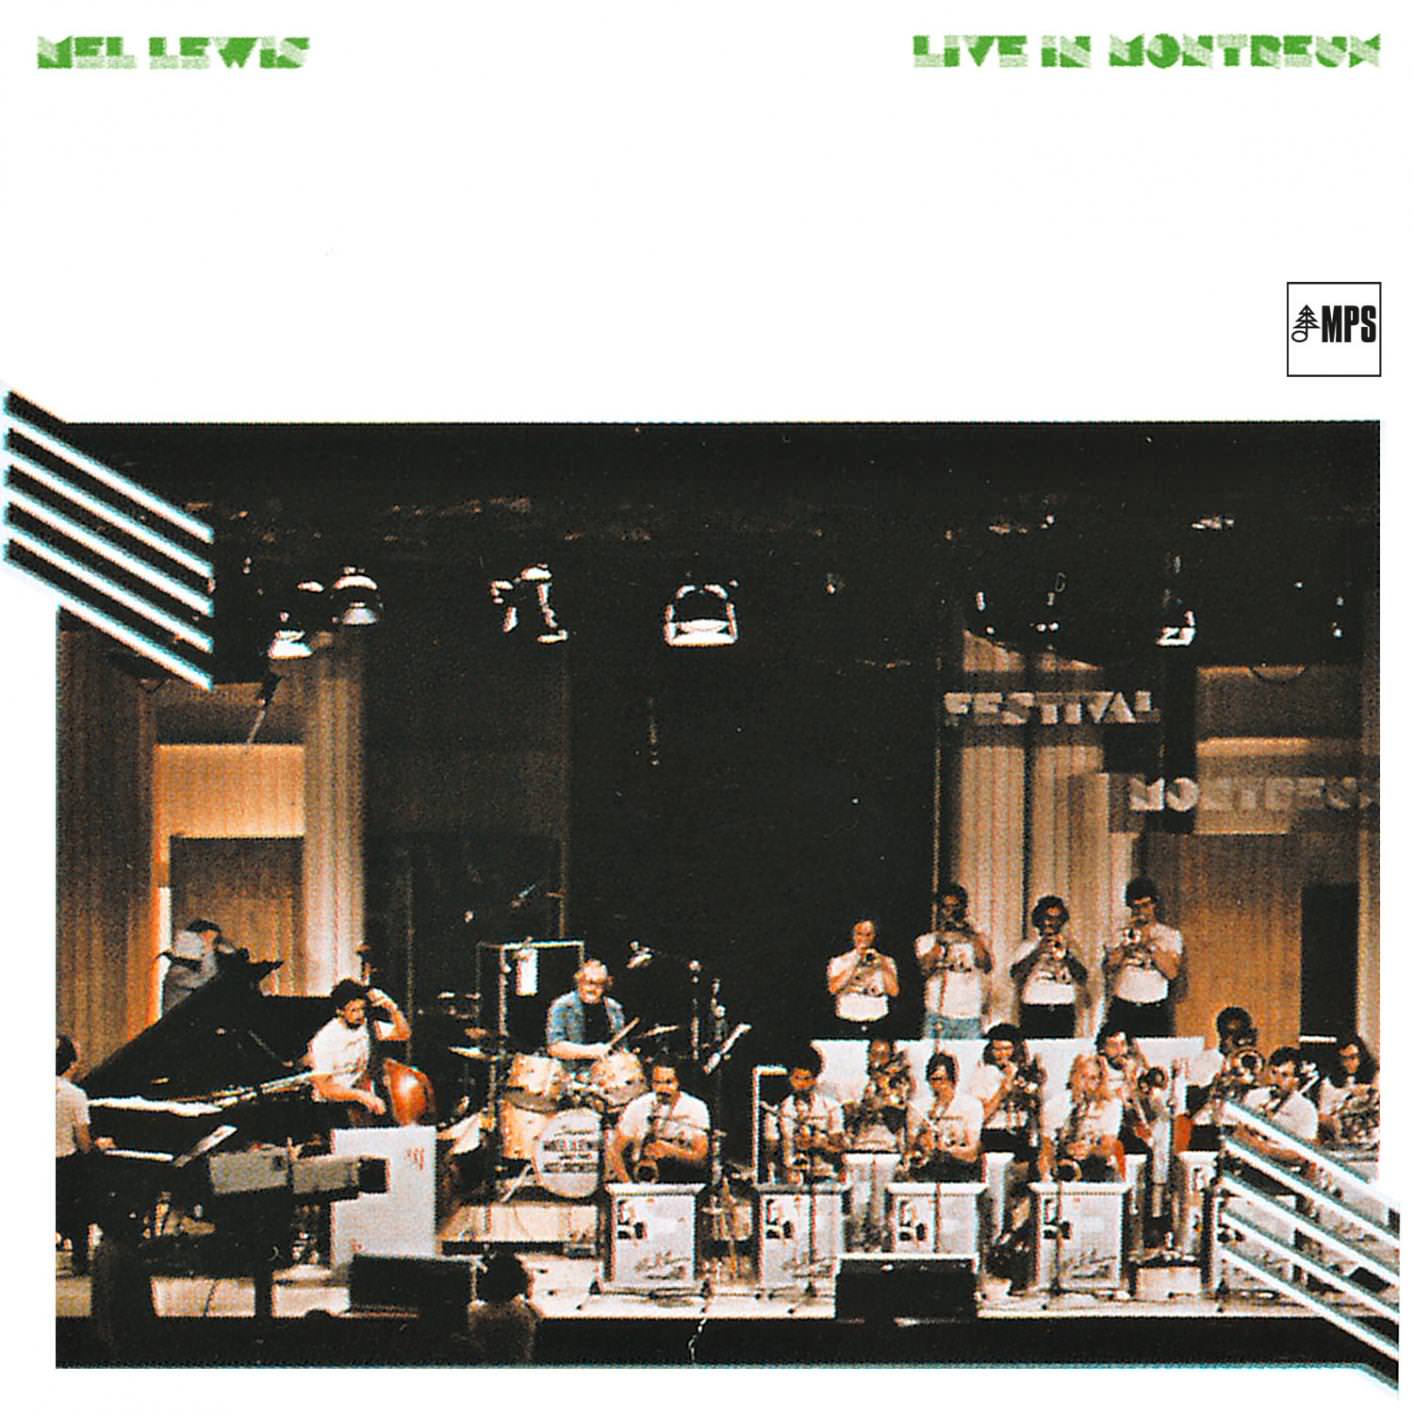 Mel Lewis & The Jazz Orchestra - Compositions Of Herbie Hancock: Live In Montreux (1982/2015) [HighResAudio FLAC 24bit/44,1kHz]